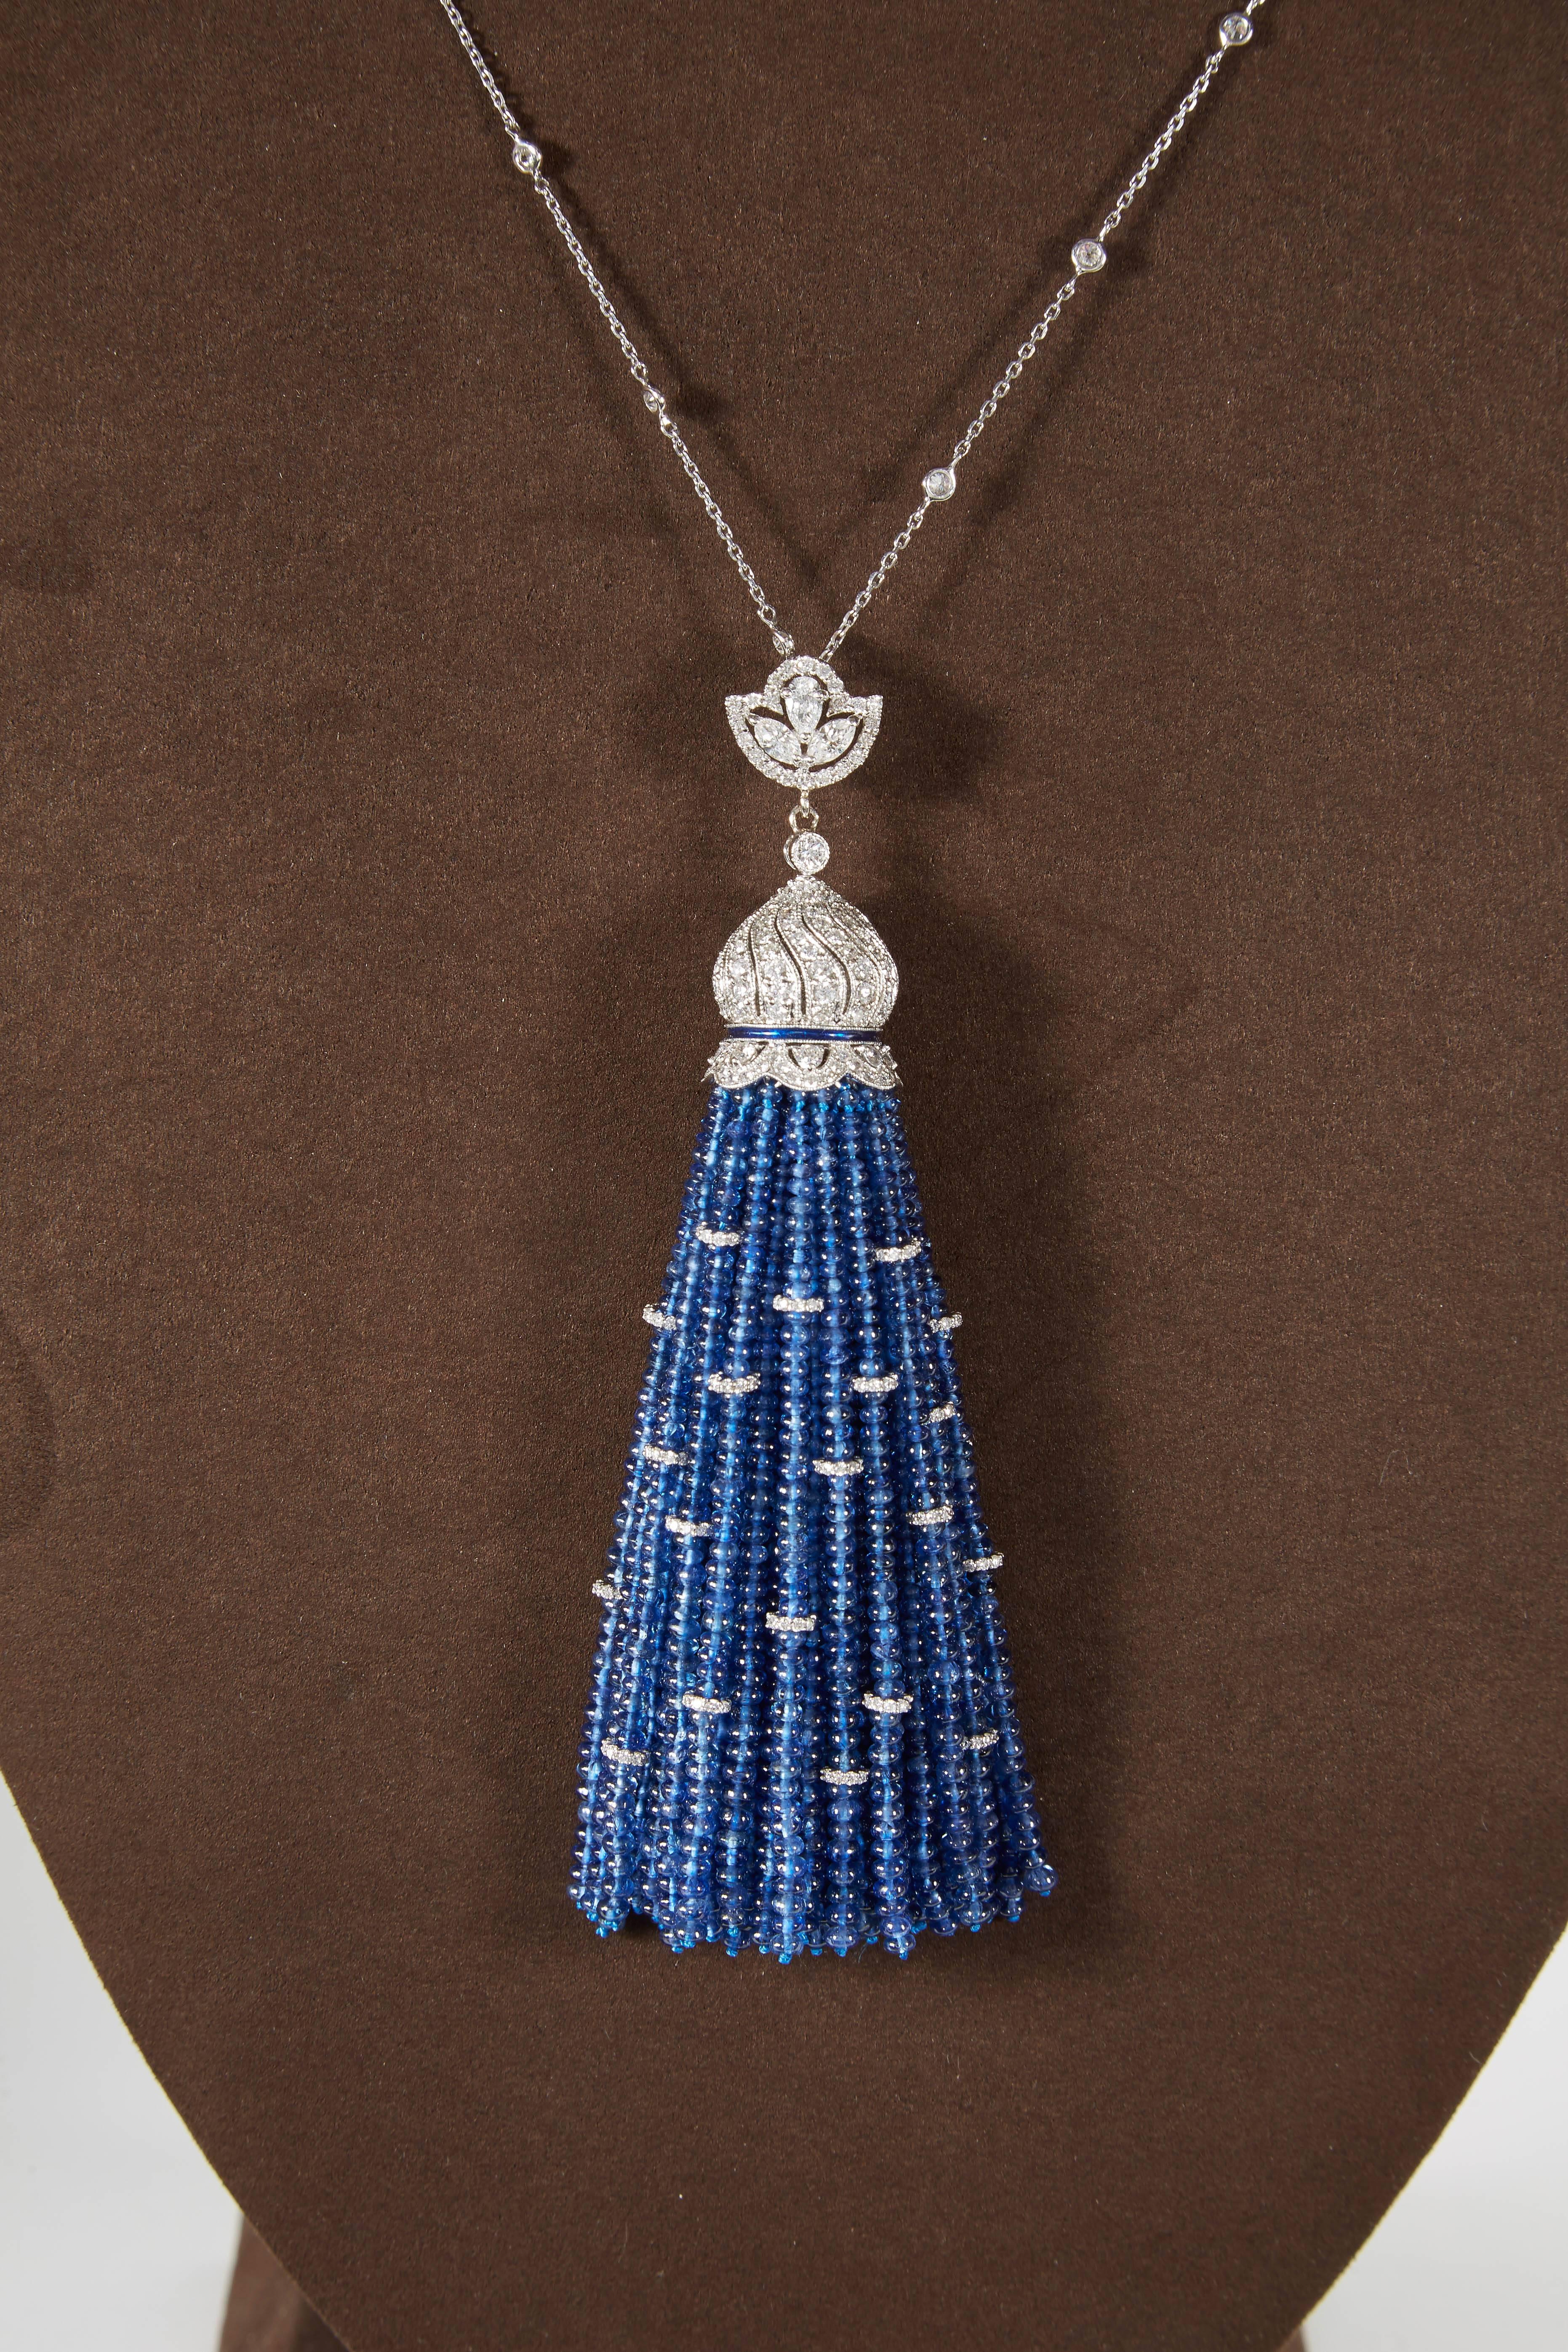 

A fantastic piece!

Over 250 carats of Fine Blue Sapphire, 7.85 carats of white round brilliant diamonds!

31 inch removable diamond by yard chain

The tassel pendant is approximately 4.25 inches long 

All set in 18k white gold. 

A fabulous